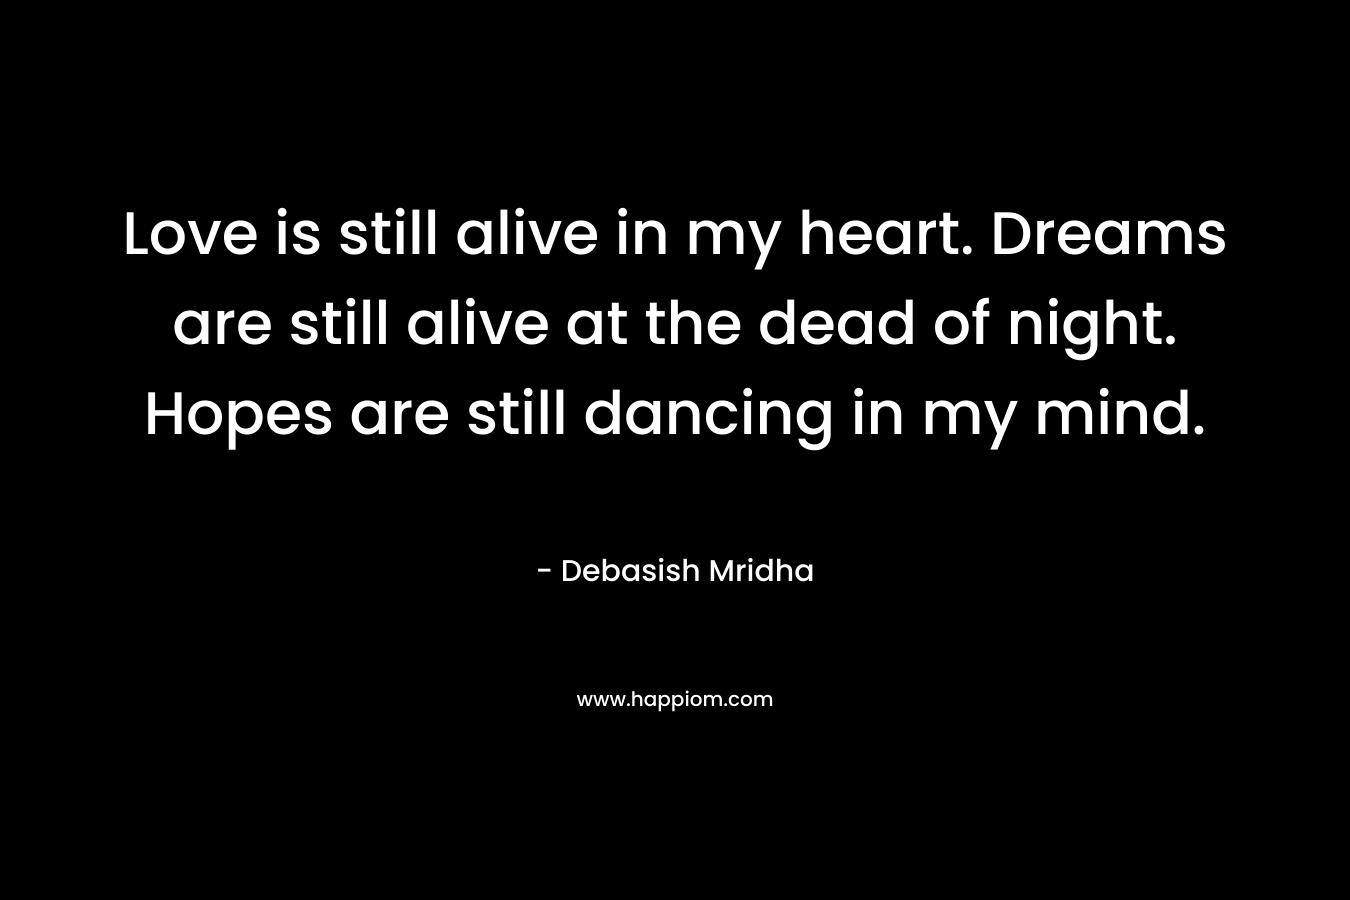 Love is still alive in my heart. Dreams are still alive at the dead of night. Hopes are still dancing in my mind.